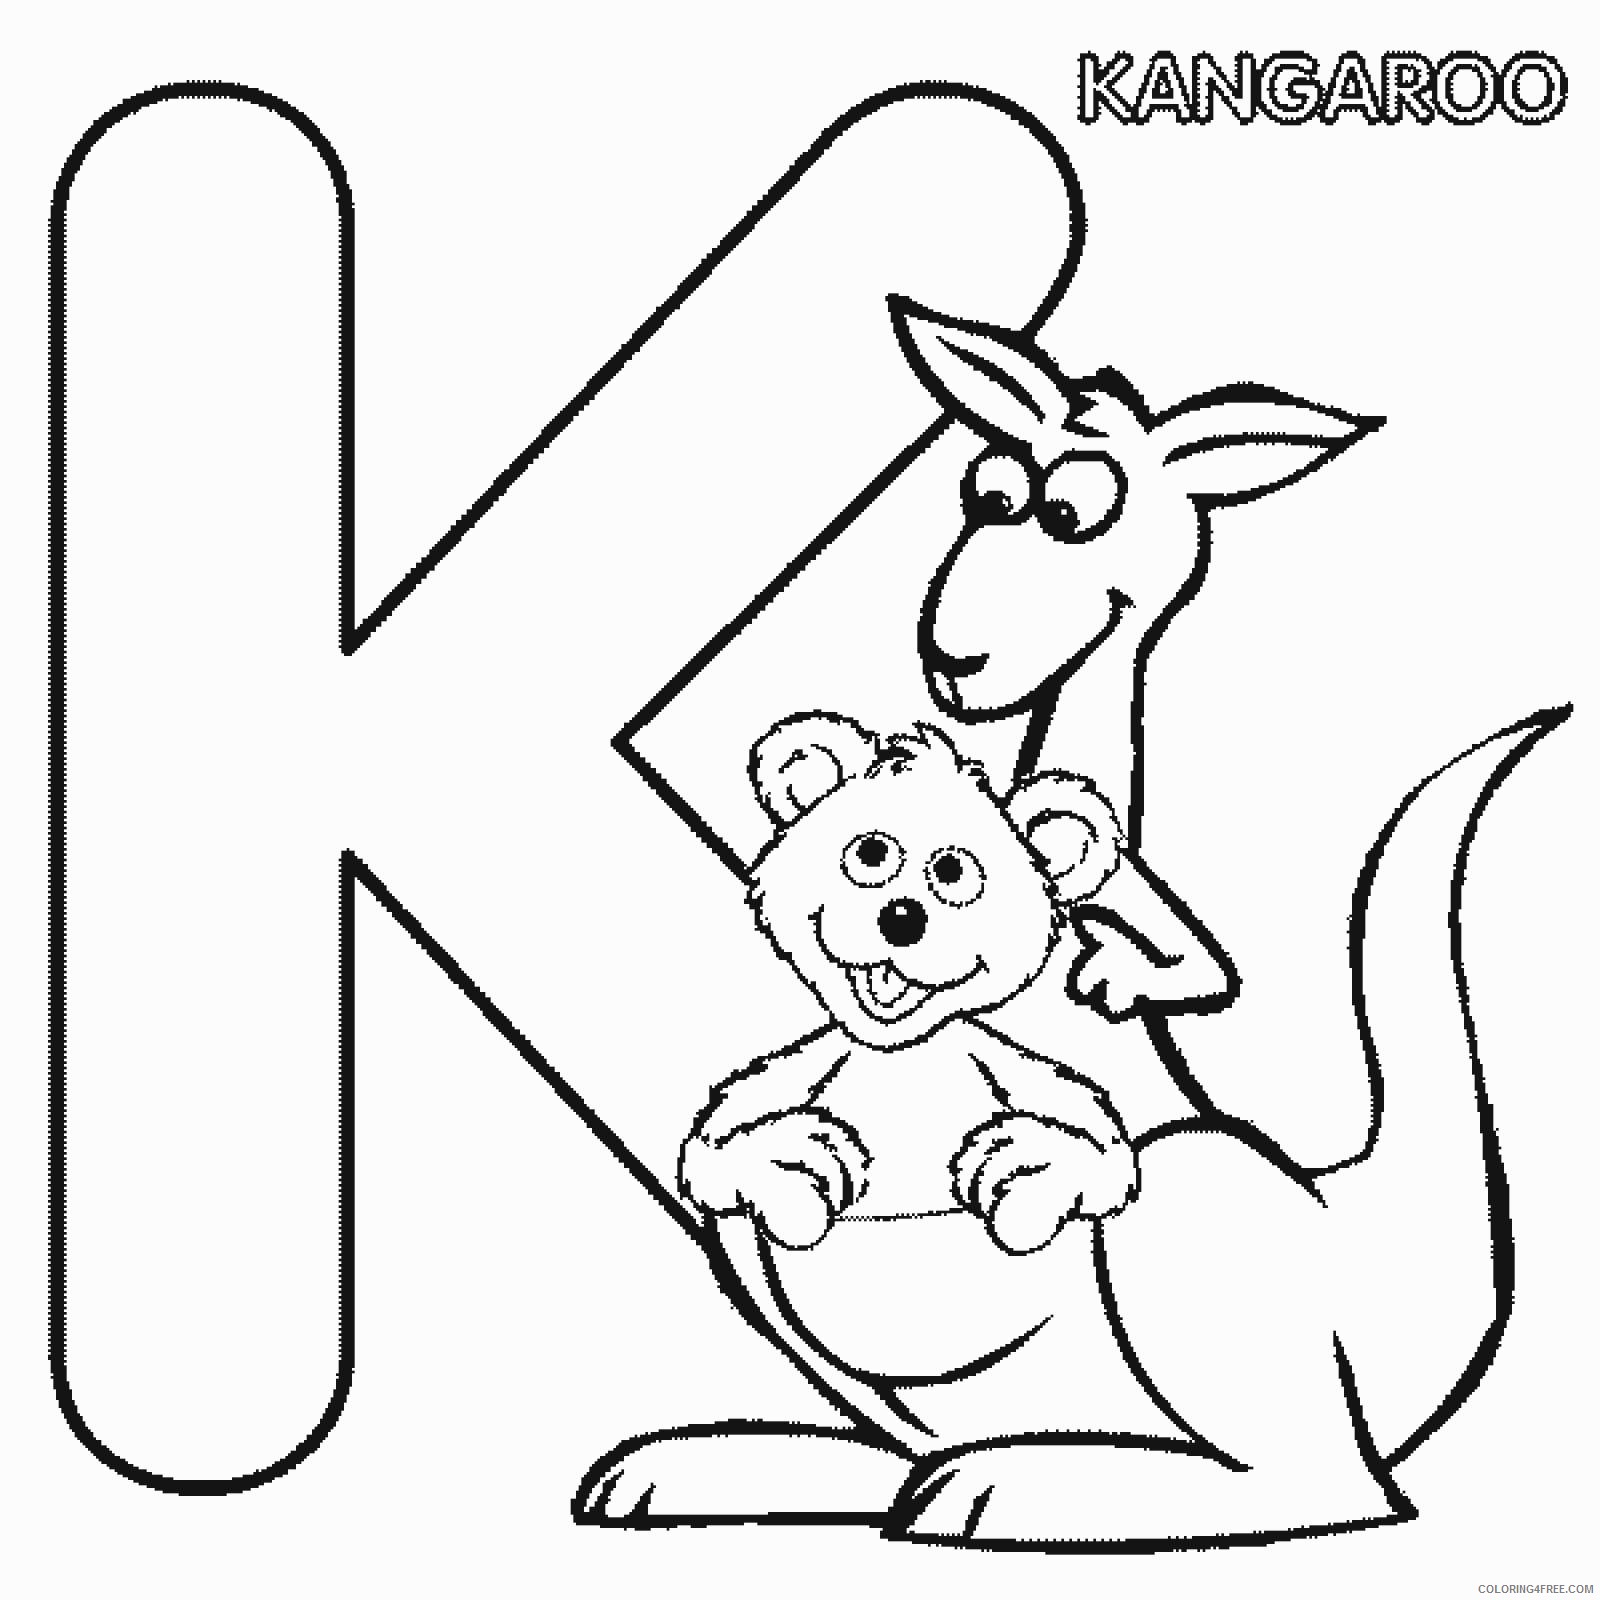 abc coloring pages k for kangaroo Coloring4free